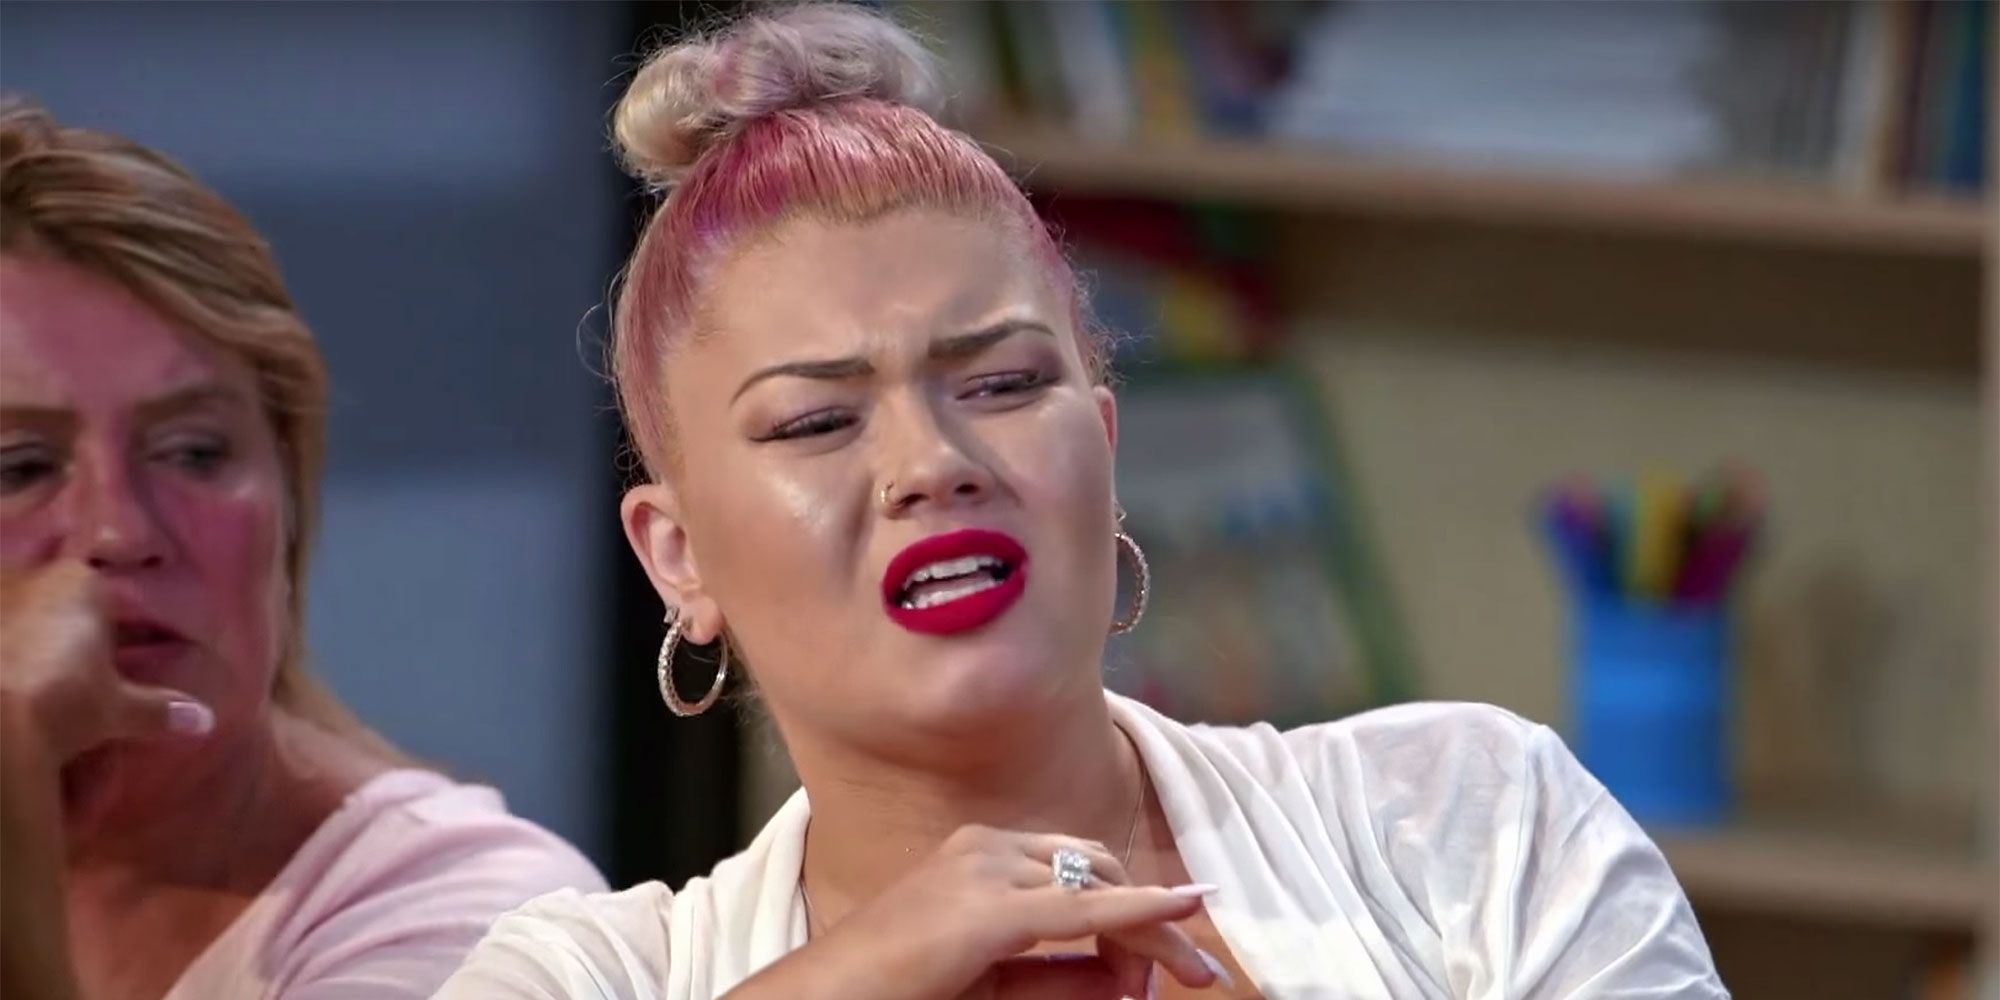 Teen Mom: Amber Portwood Loses Custody Of Son To Ex Andrew